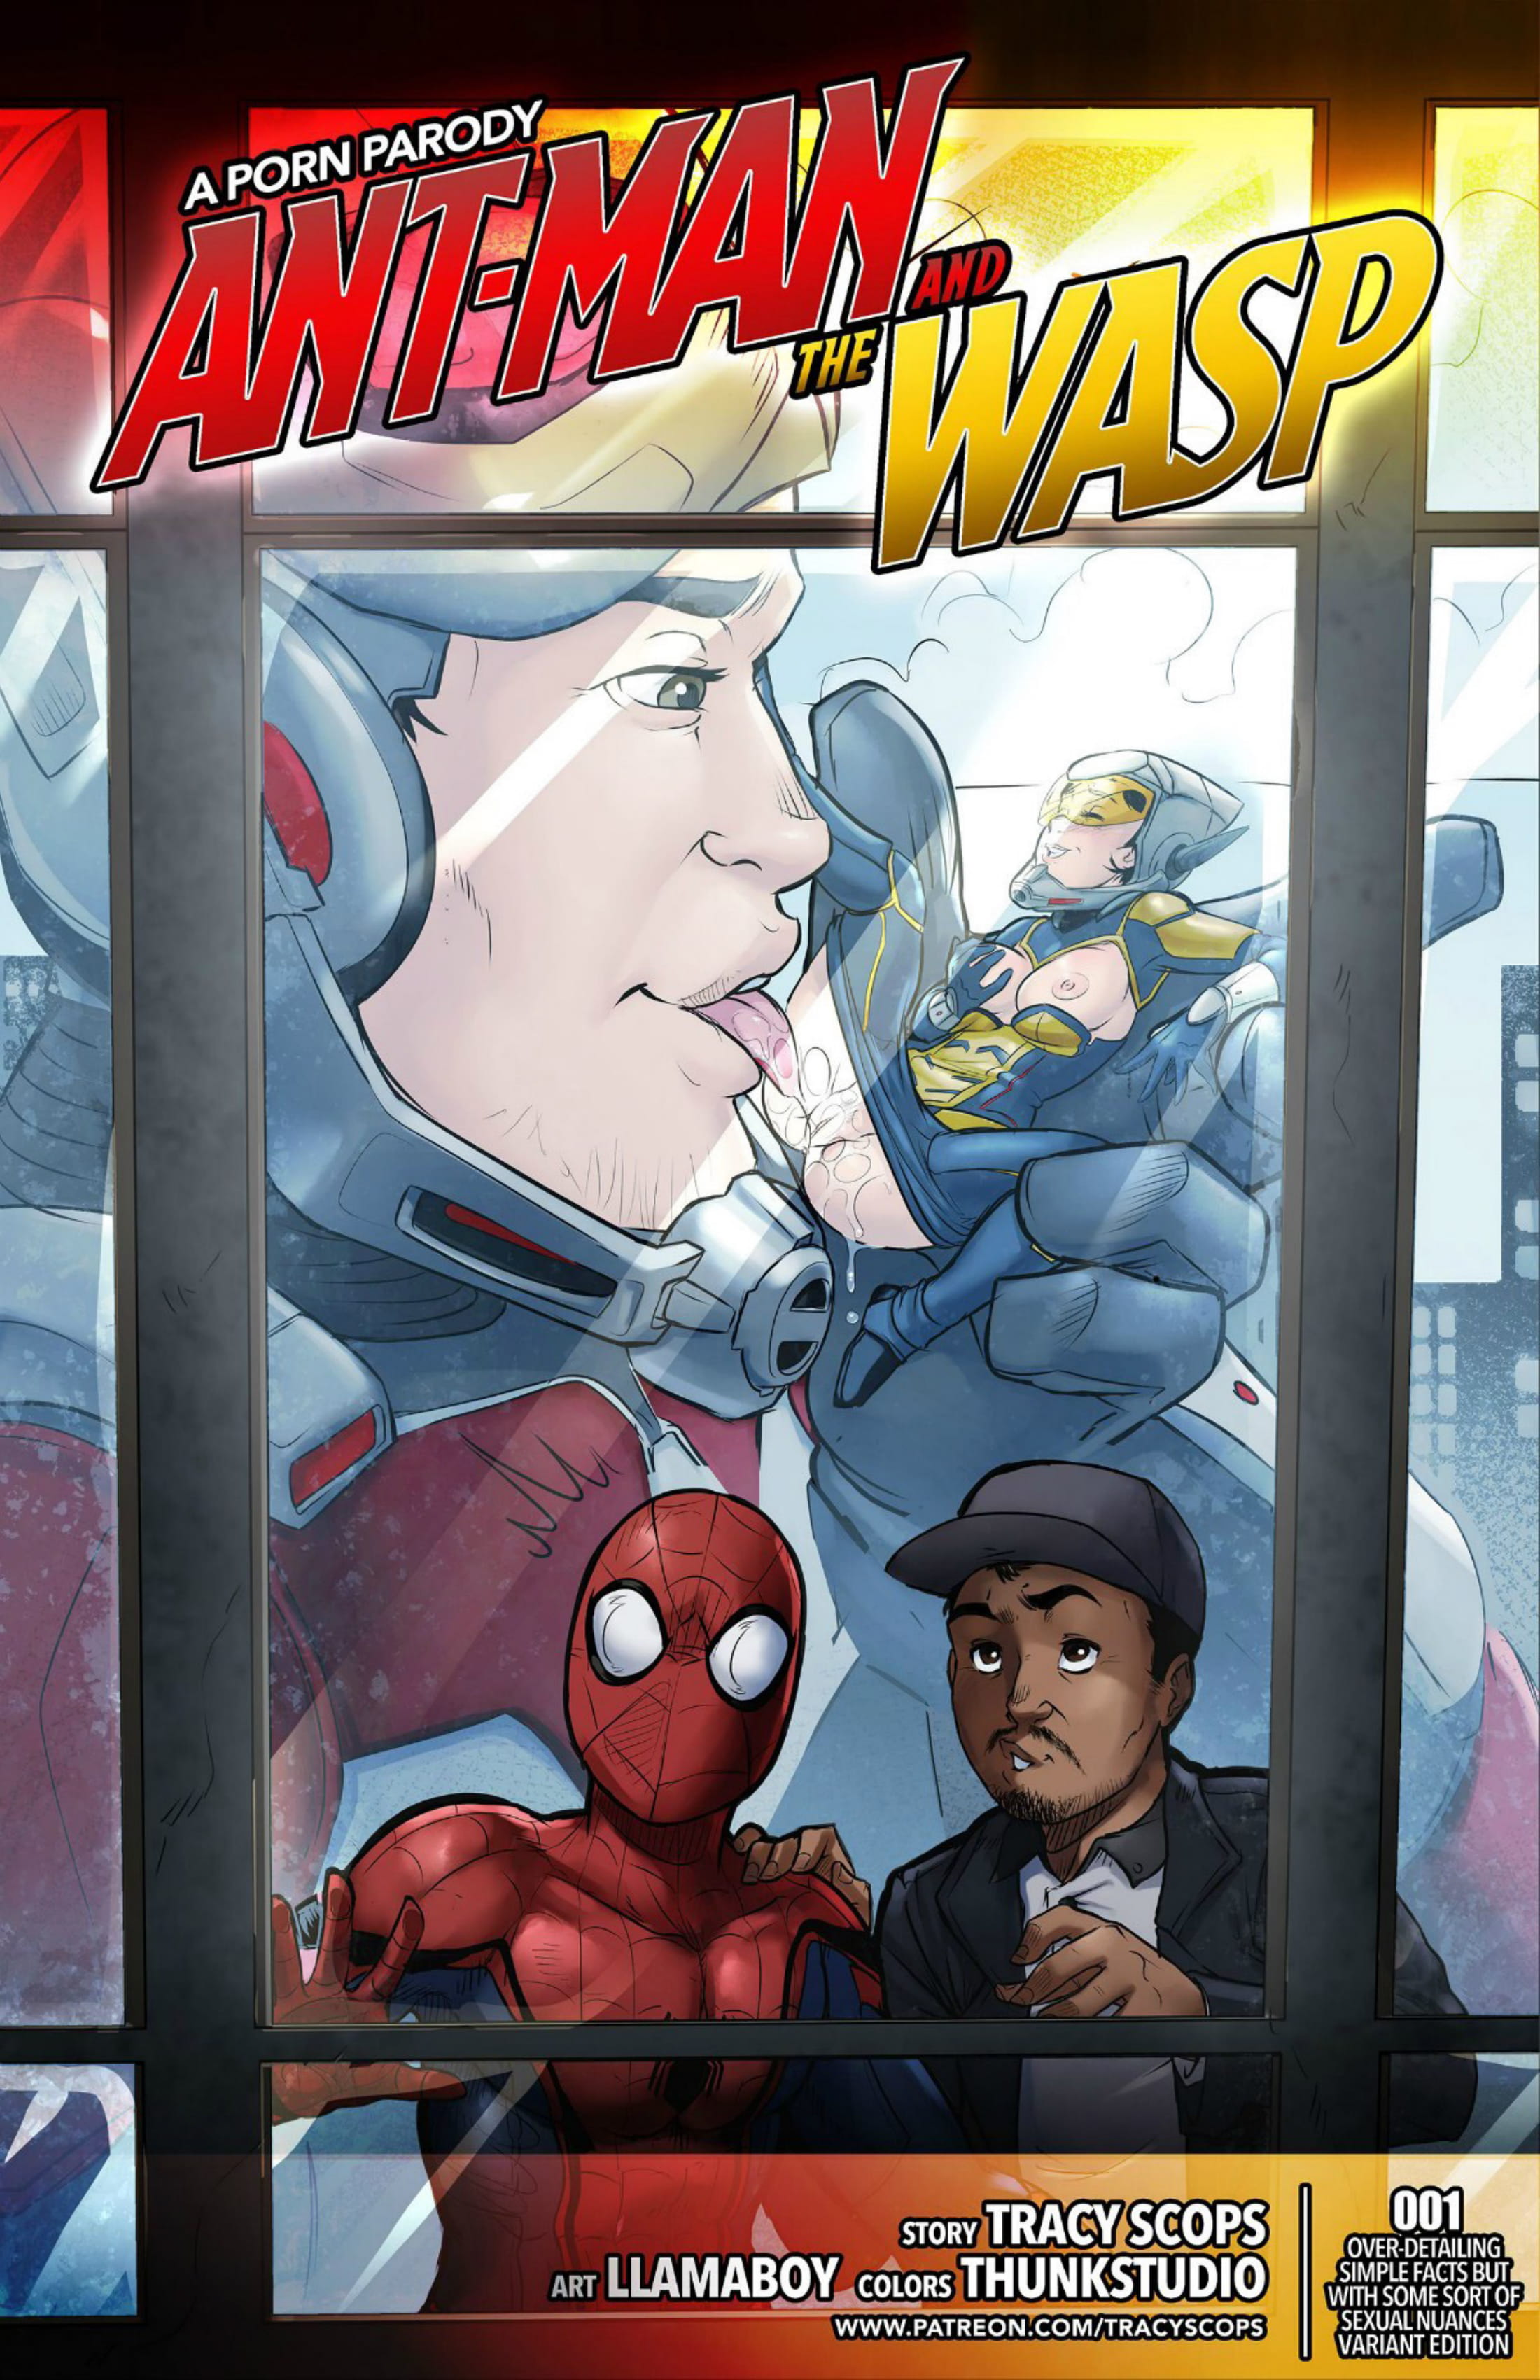 Antman and the Wasp (Tracy Scops) (llamaboy) Spiderman Antman Scrolller.